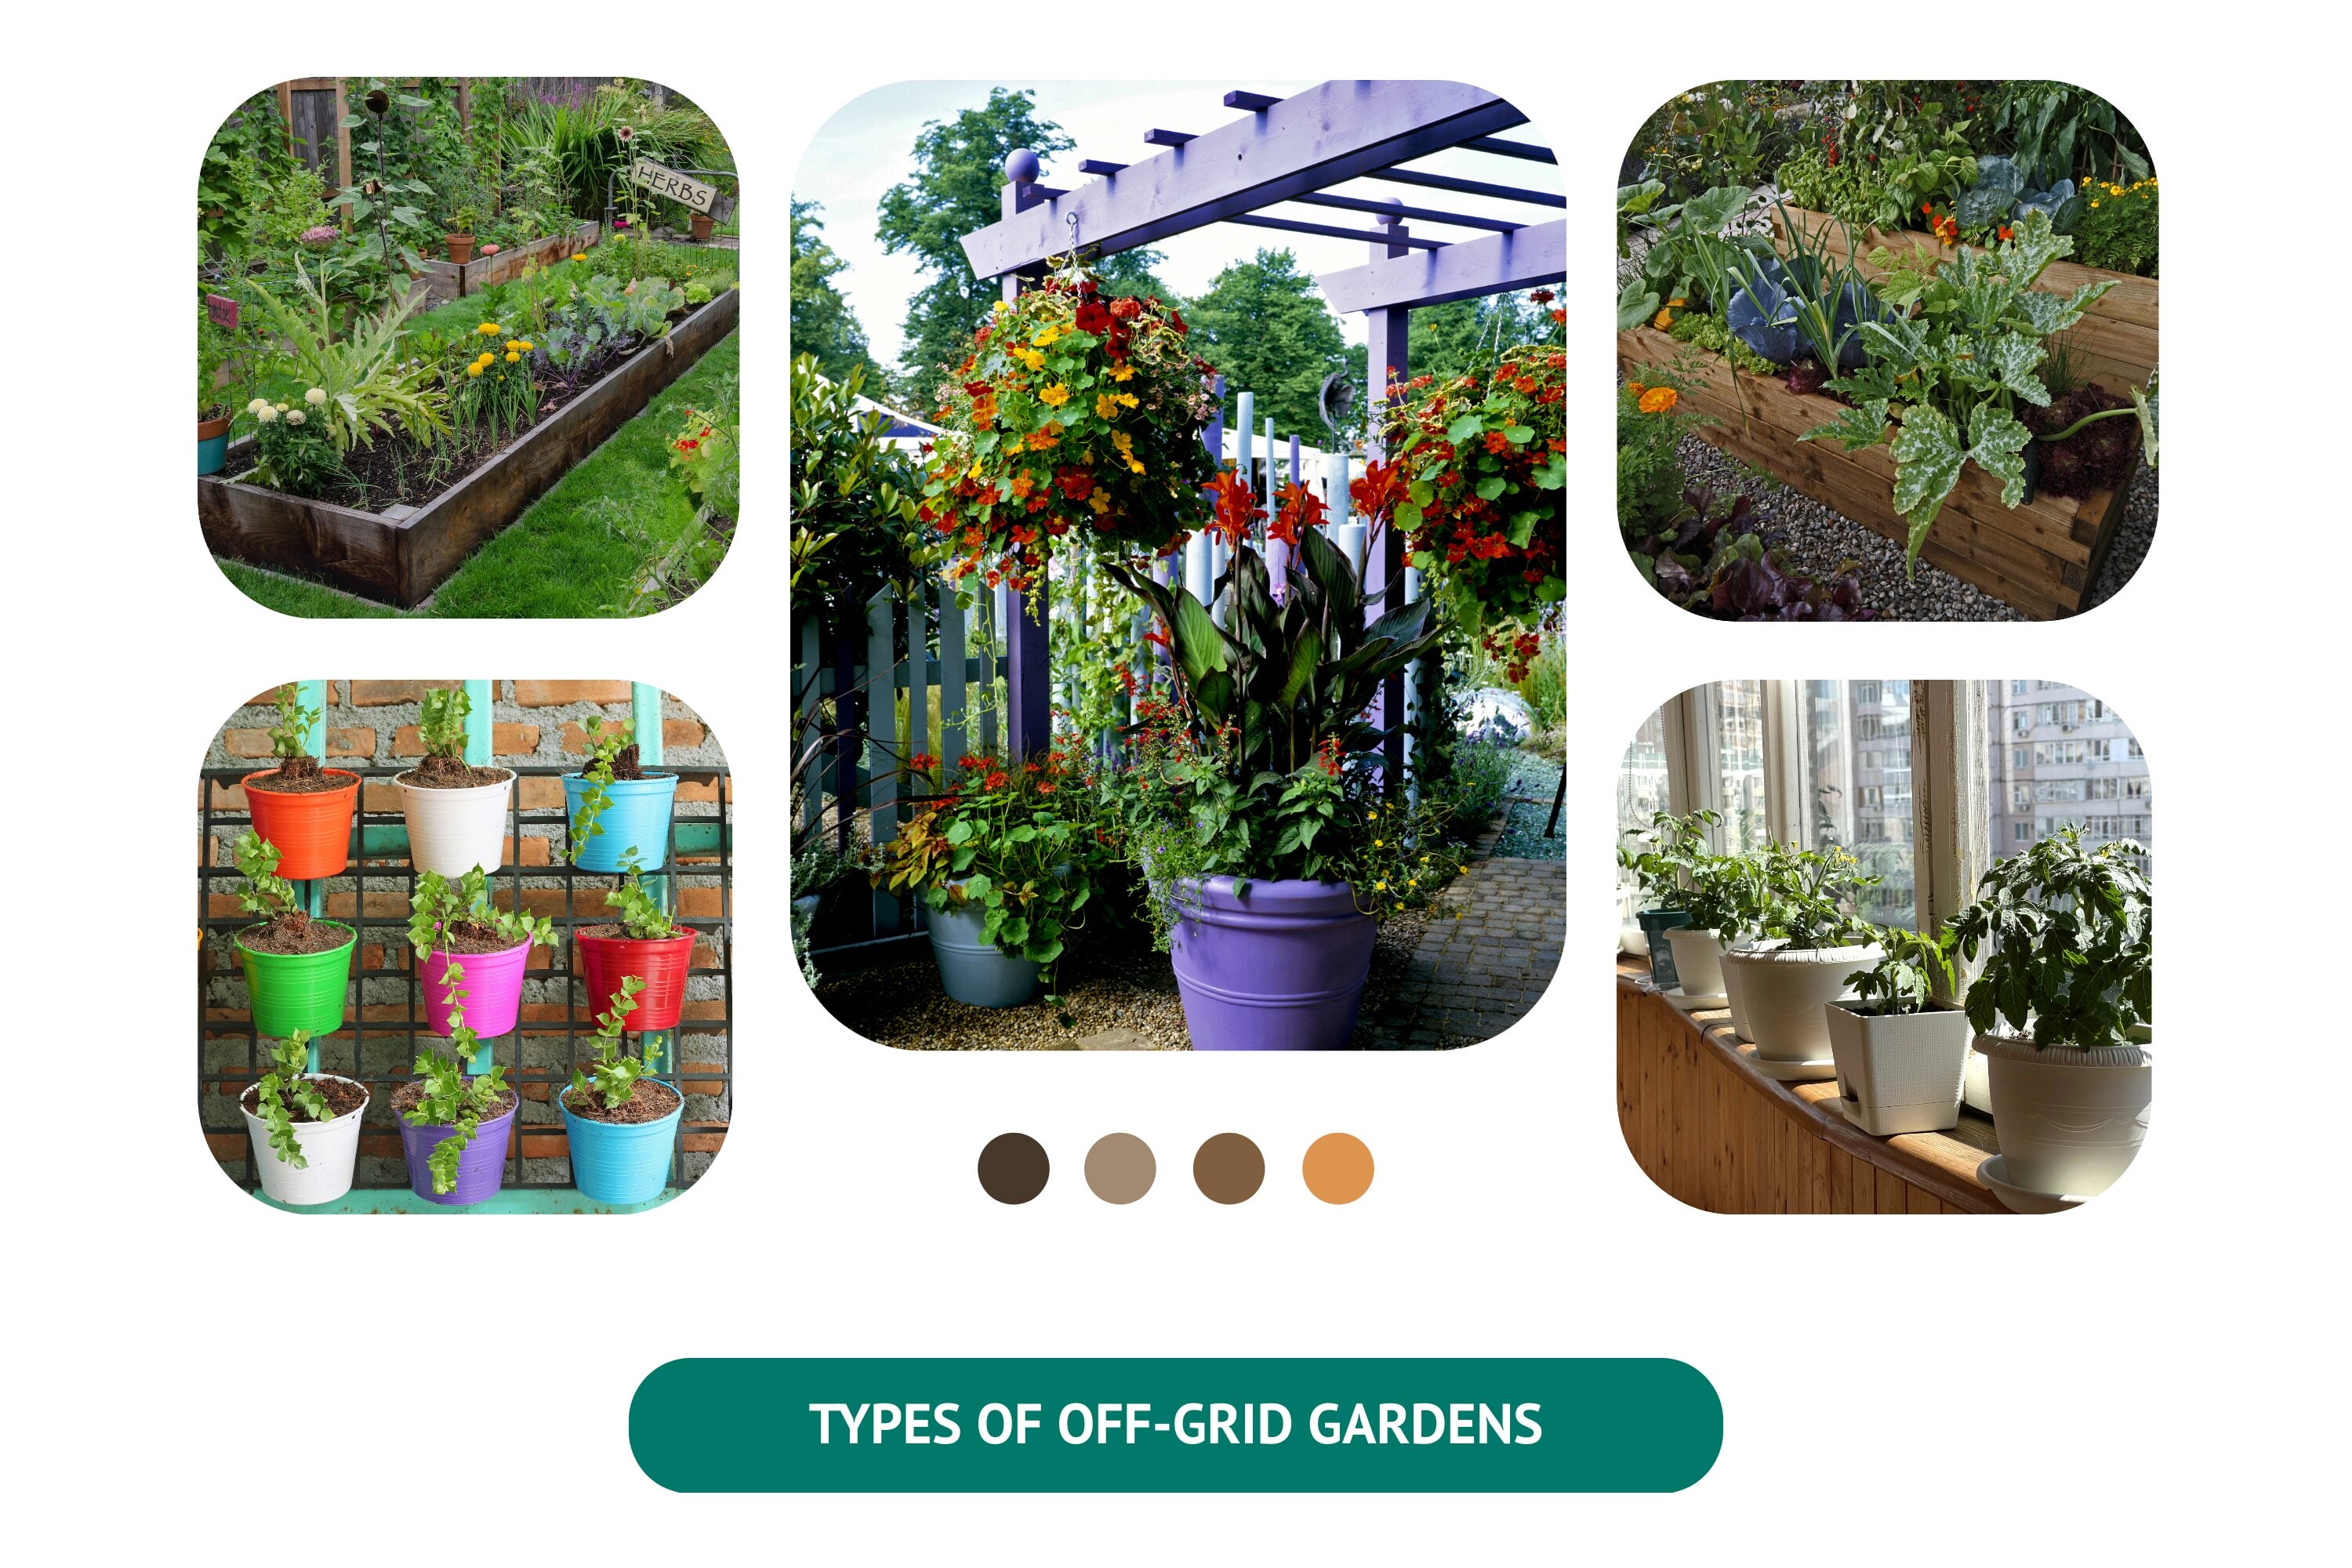 There are various types of off-grid gardens.